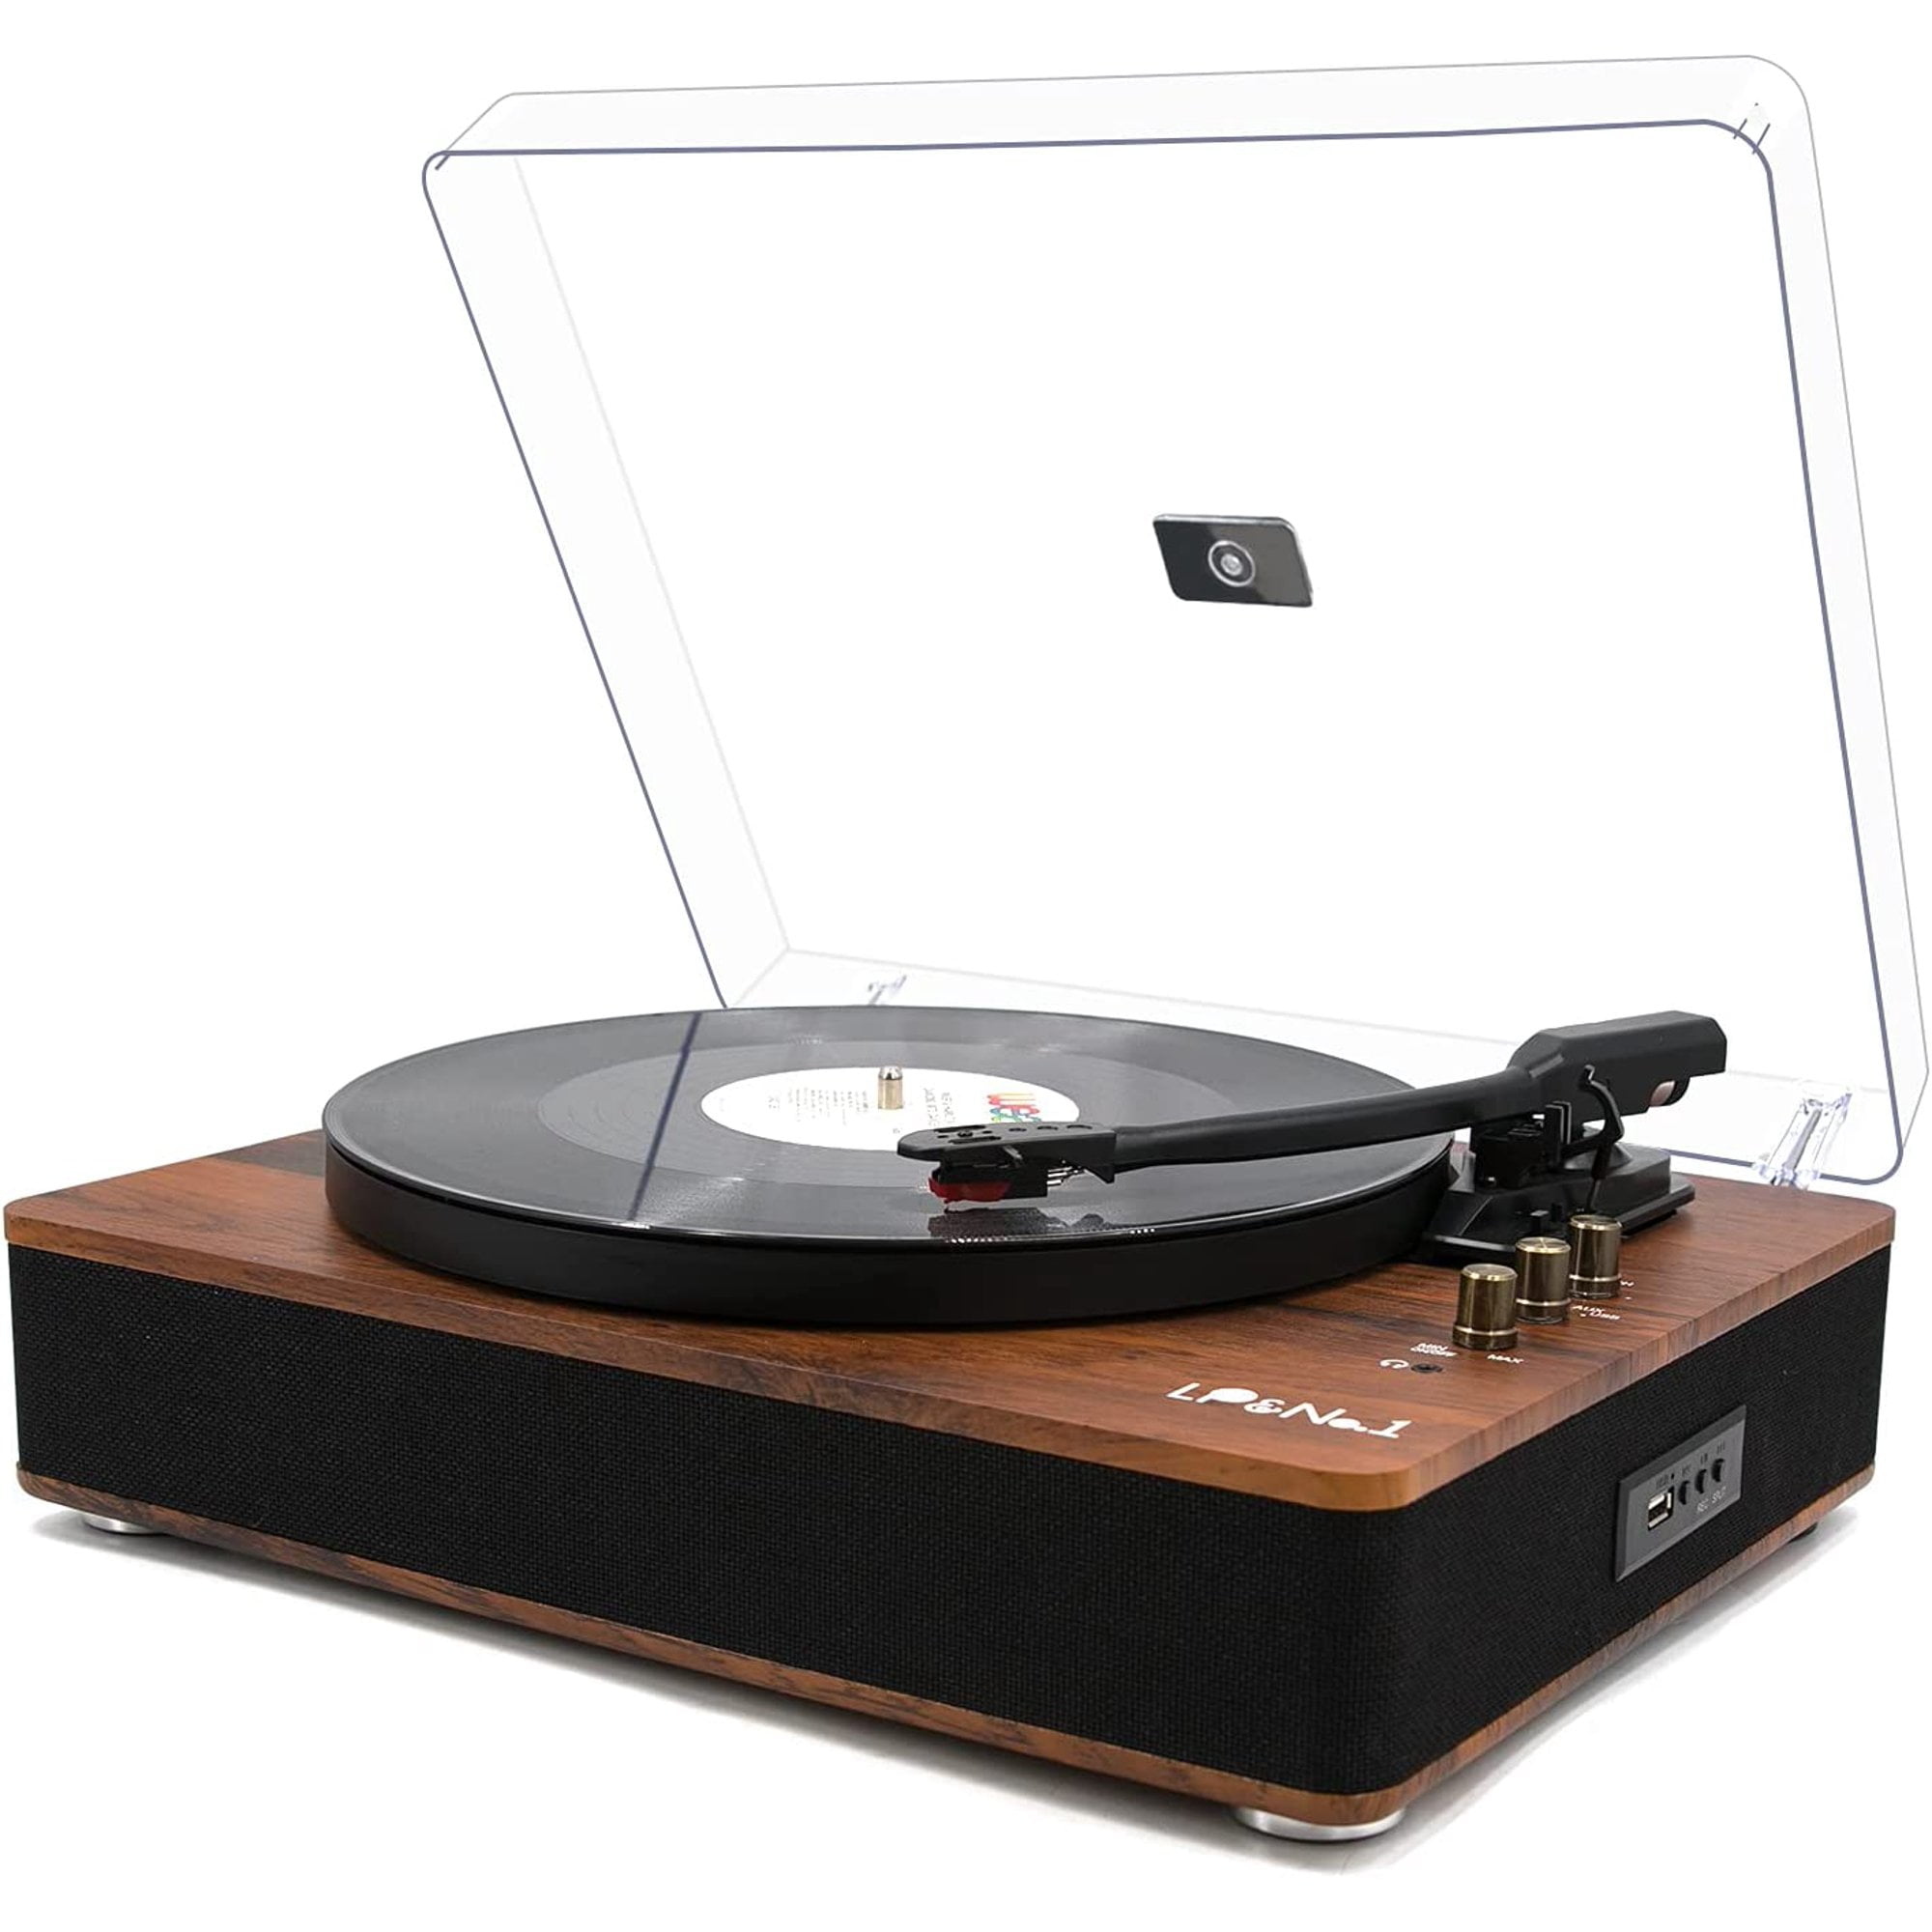 Spe＿並行輸入-　LP＆NO.1　Player　Belt-Driven　Play＆Recording　USB　Turntable　Built-in　Record　Record　Speakers　with　Phonograph　Player　Vintage　Bluetooth　and